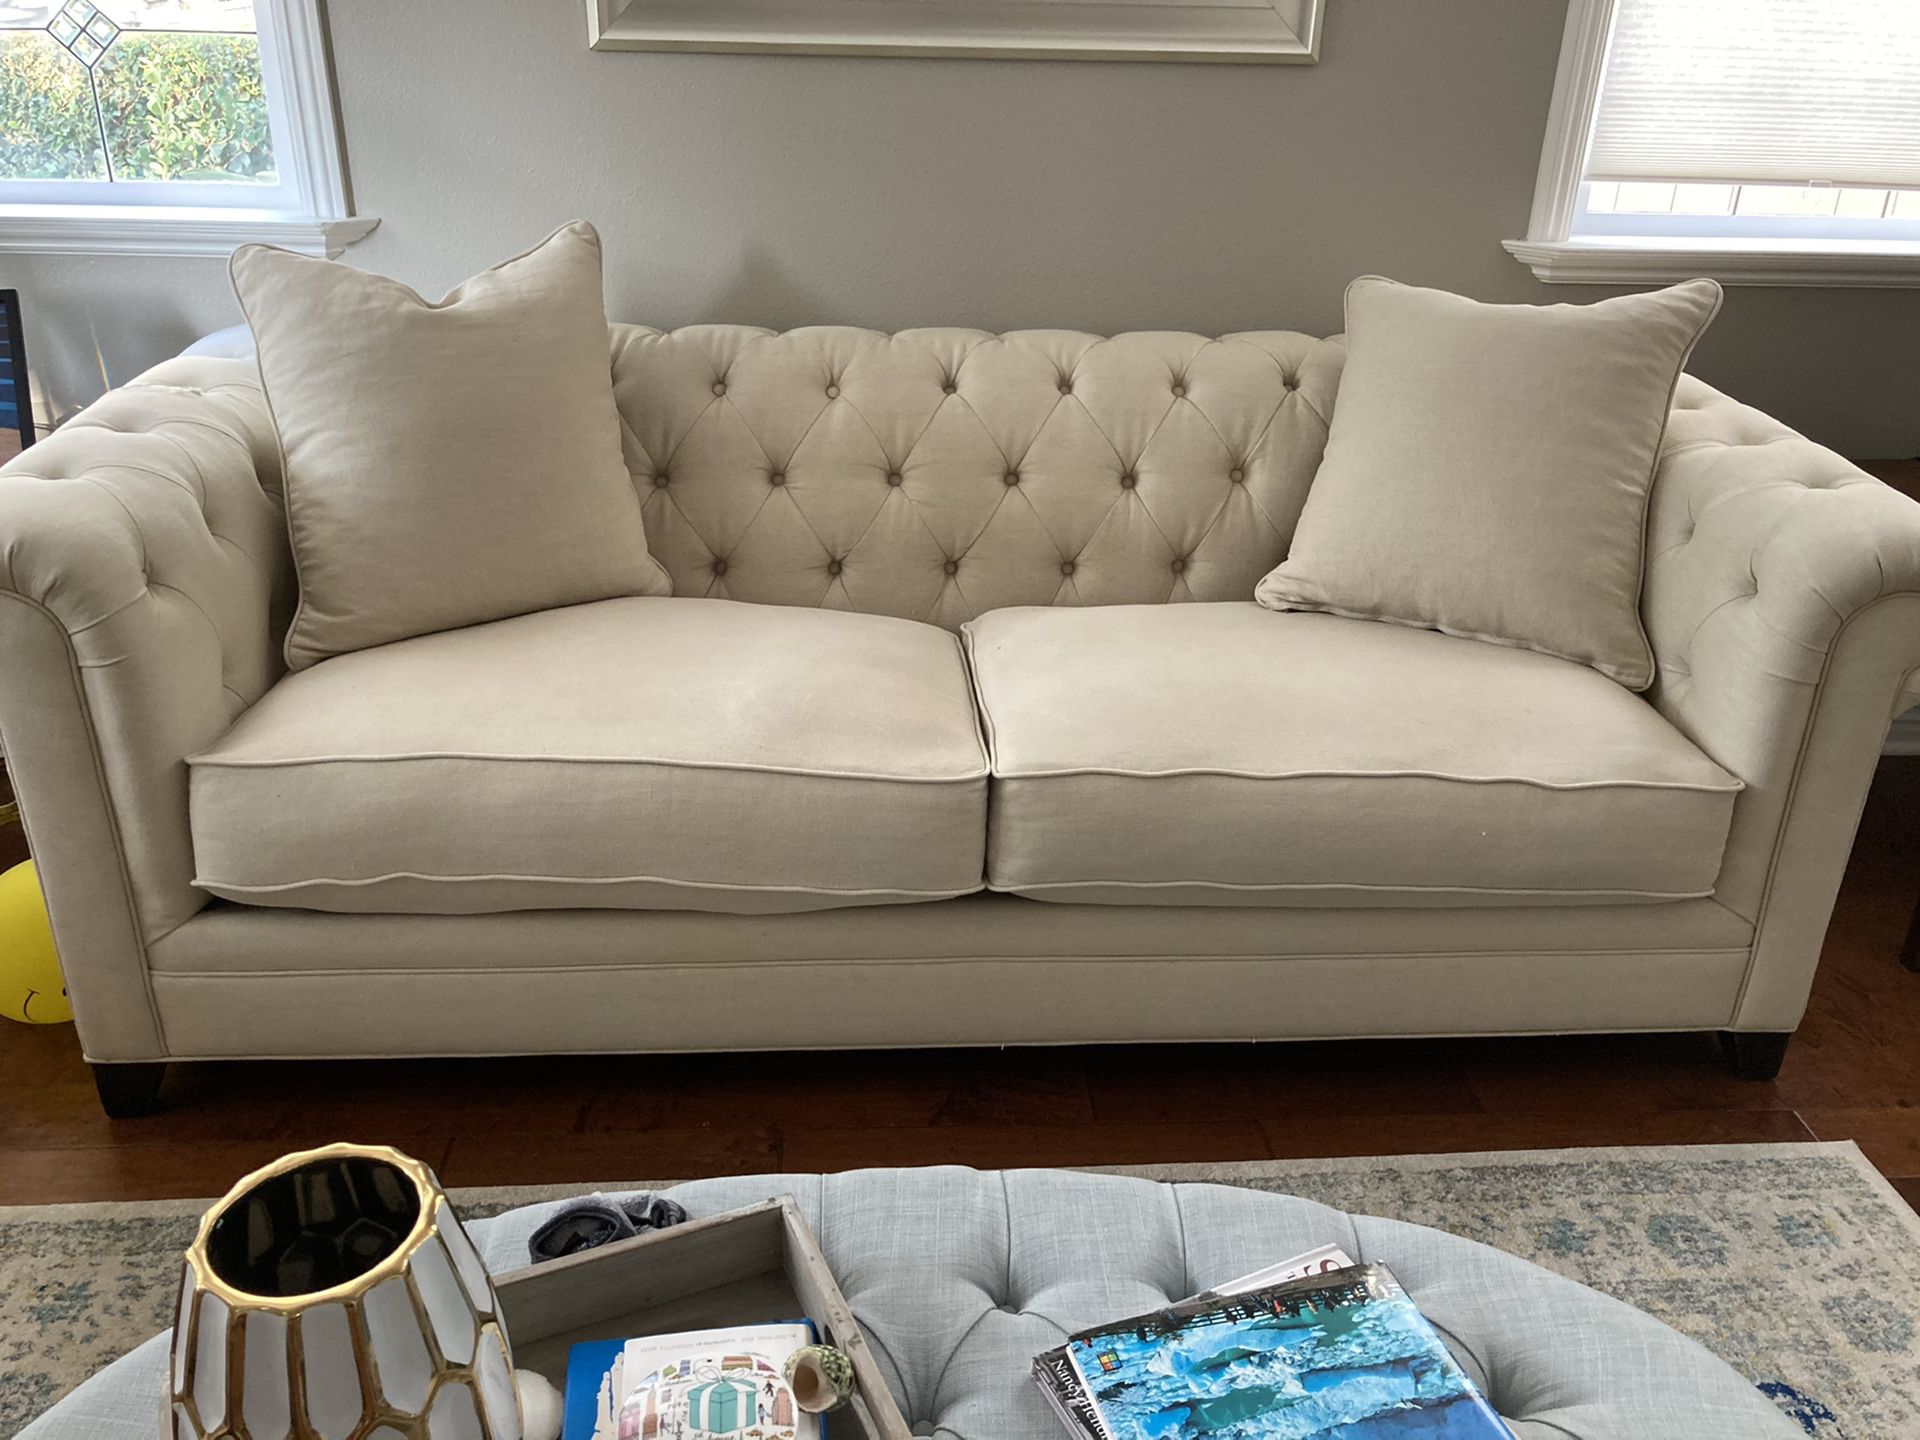 Tufted Beige Couch